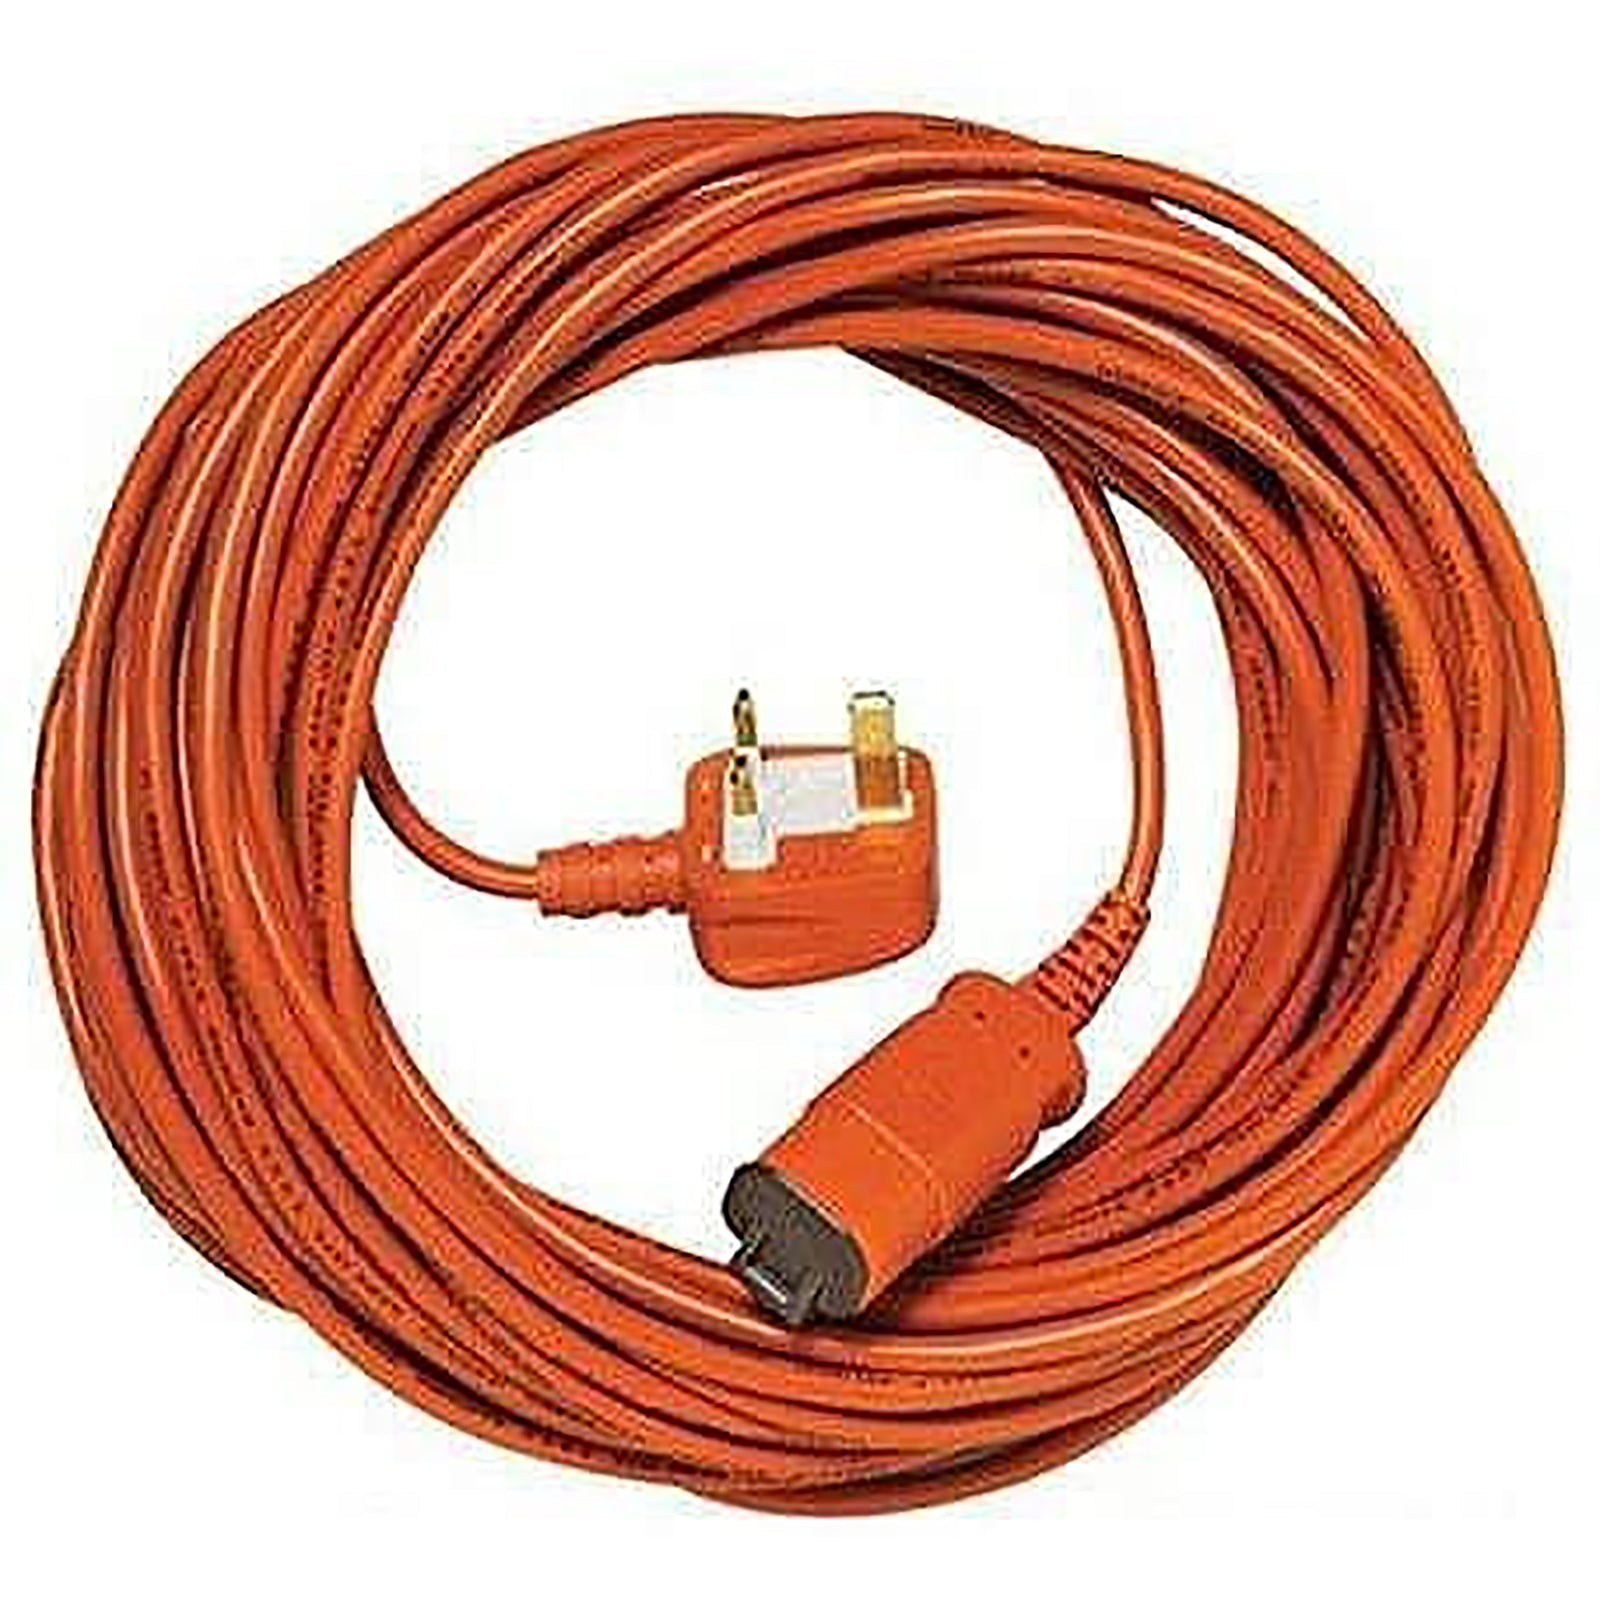 Cable for Flymo Lawnmower Hedge Trimmer Metre Lead Plug (15m)